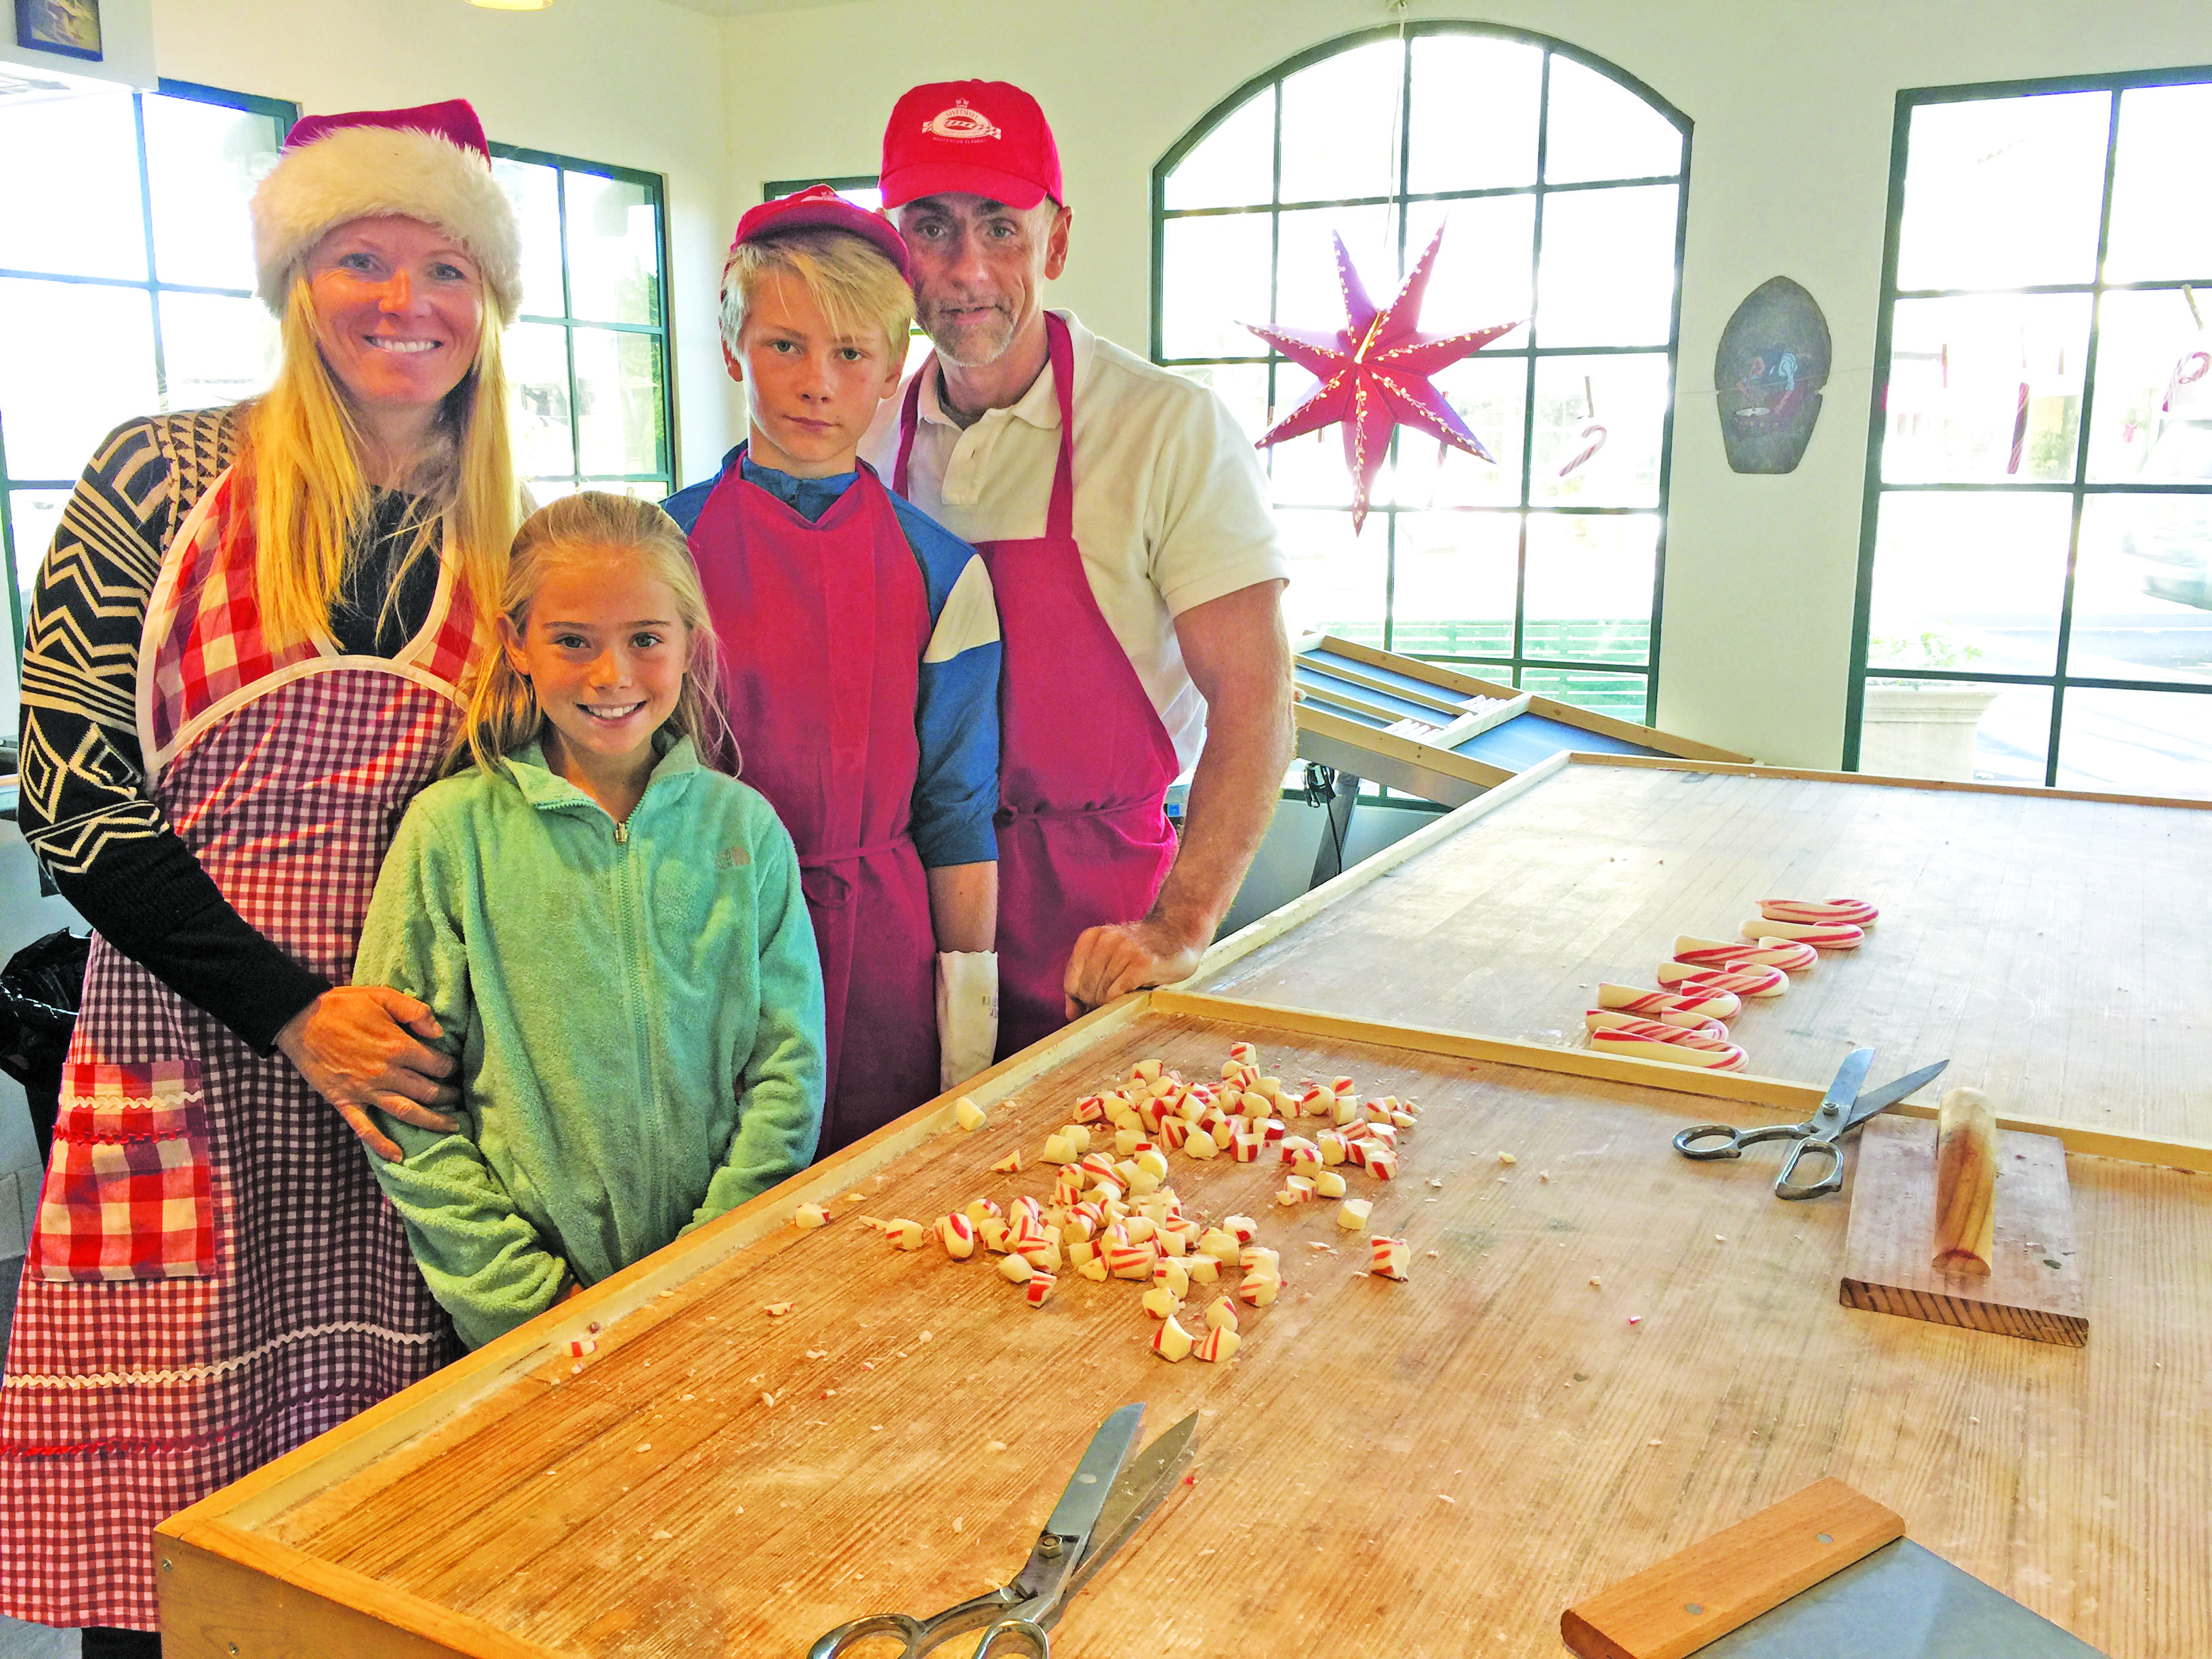 Swedish candy comes to Danish town